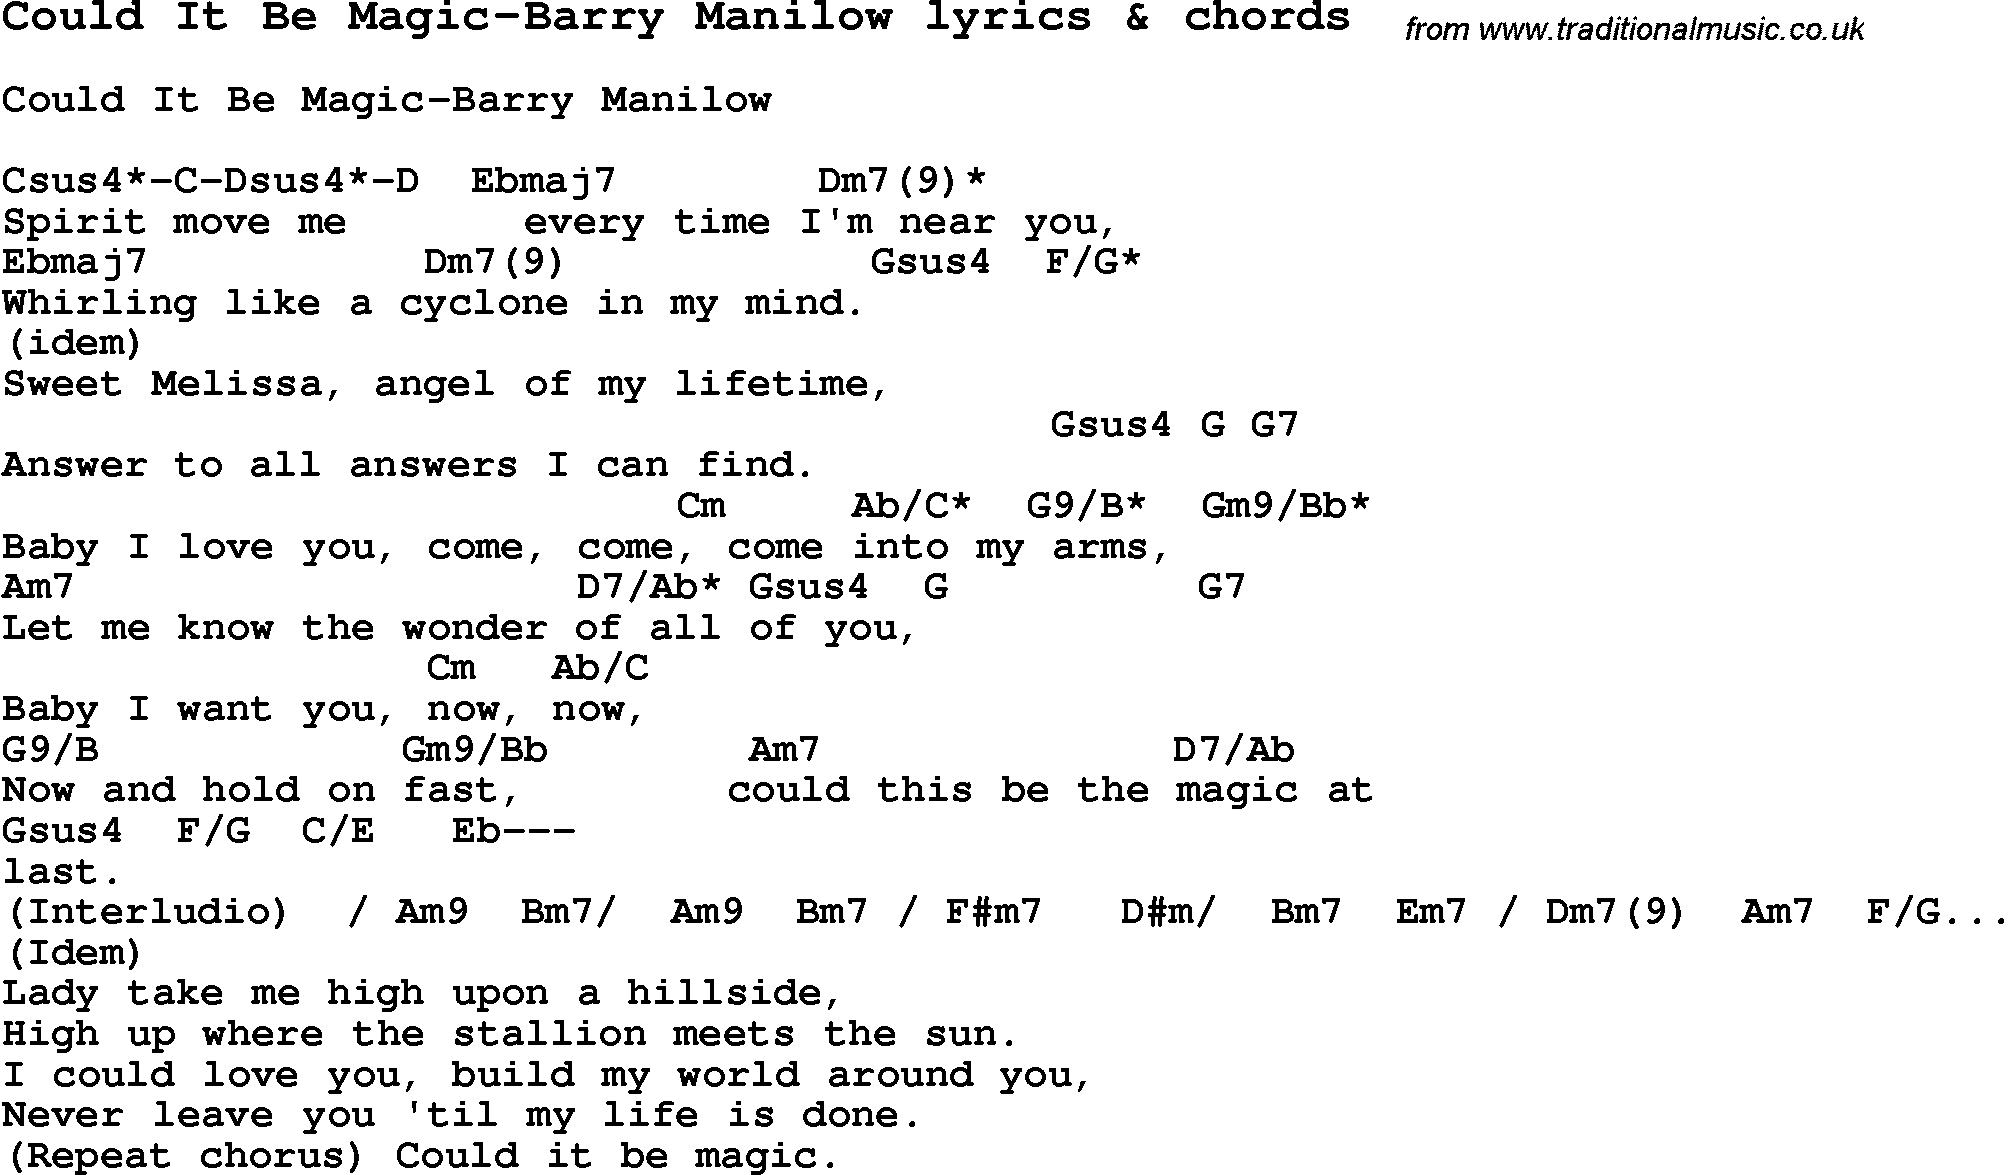 Love Song Lyrics for: Could It Be Magic-Barry Manilow with chords for Ukulele, Guitar Banjo etc.